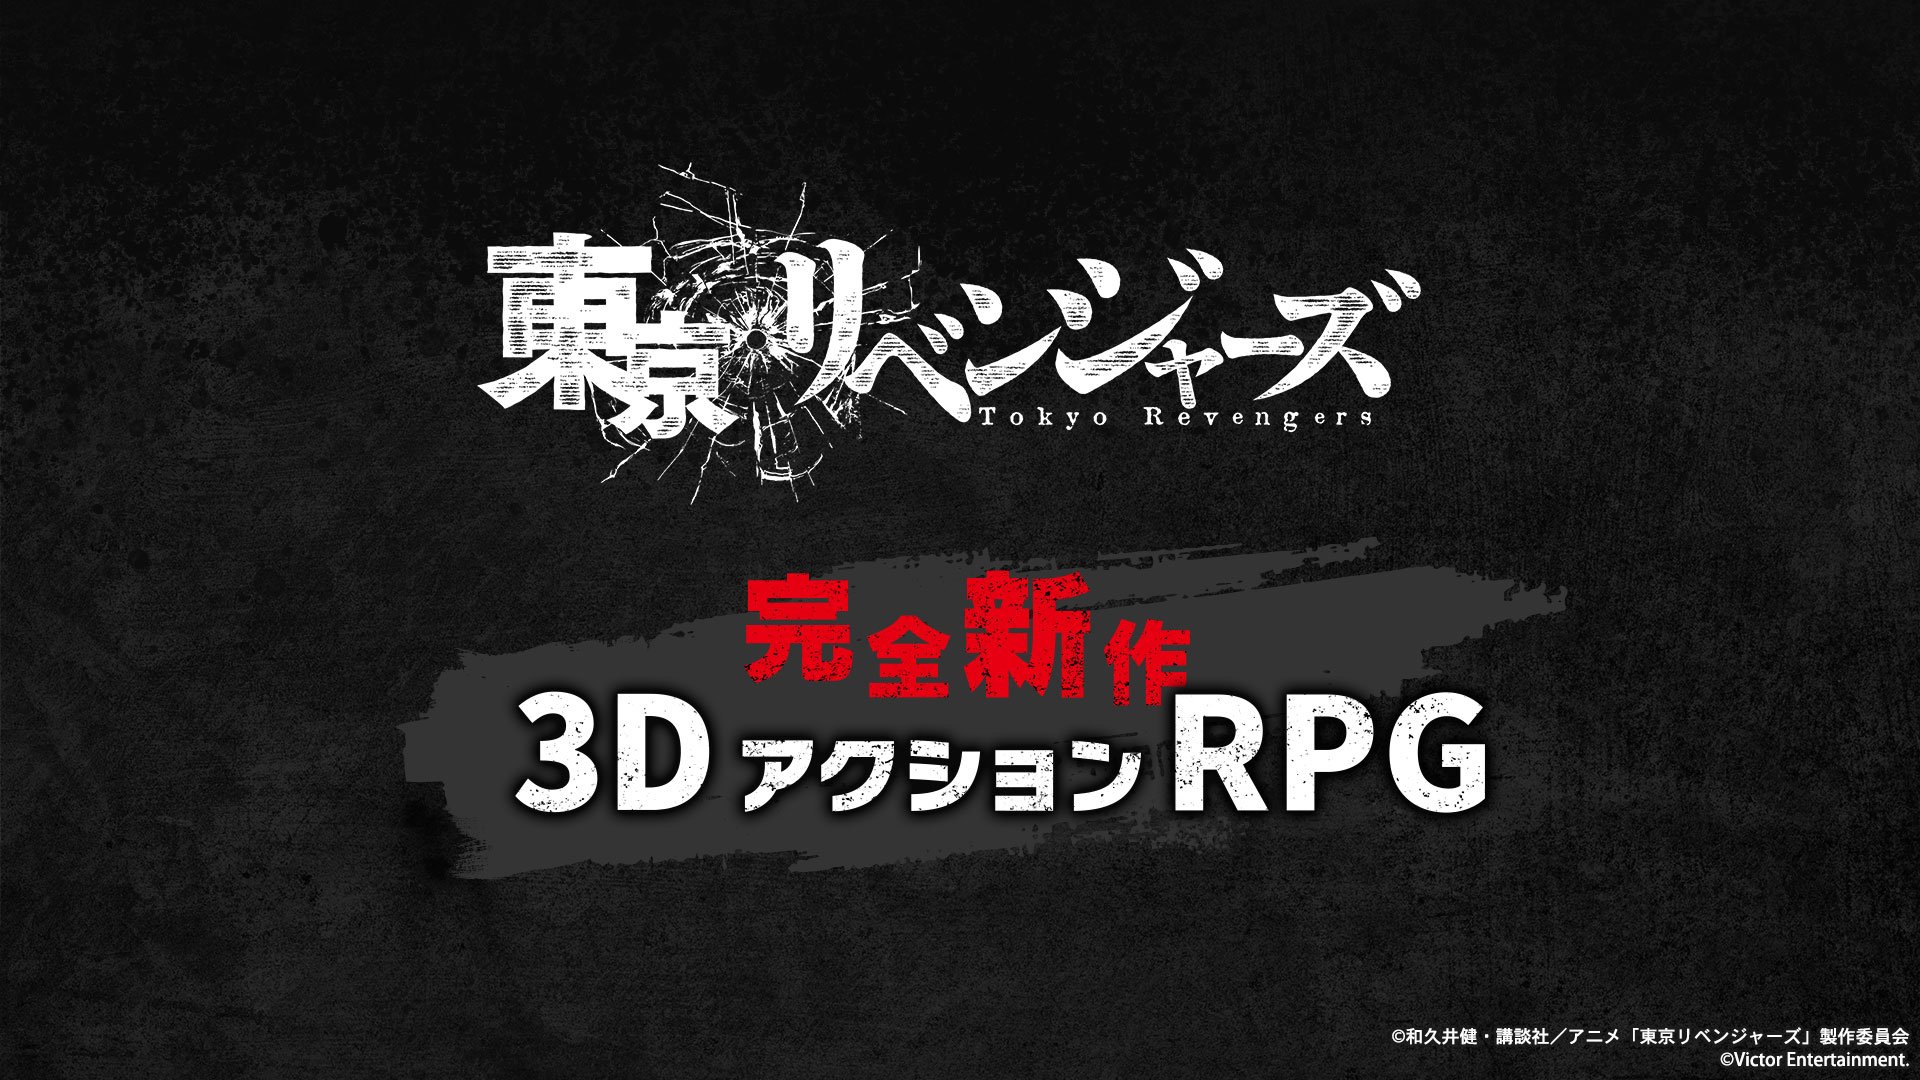 Tokyo Revengers 3D action RPG announced for PS5, PS4, Switch, PC